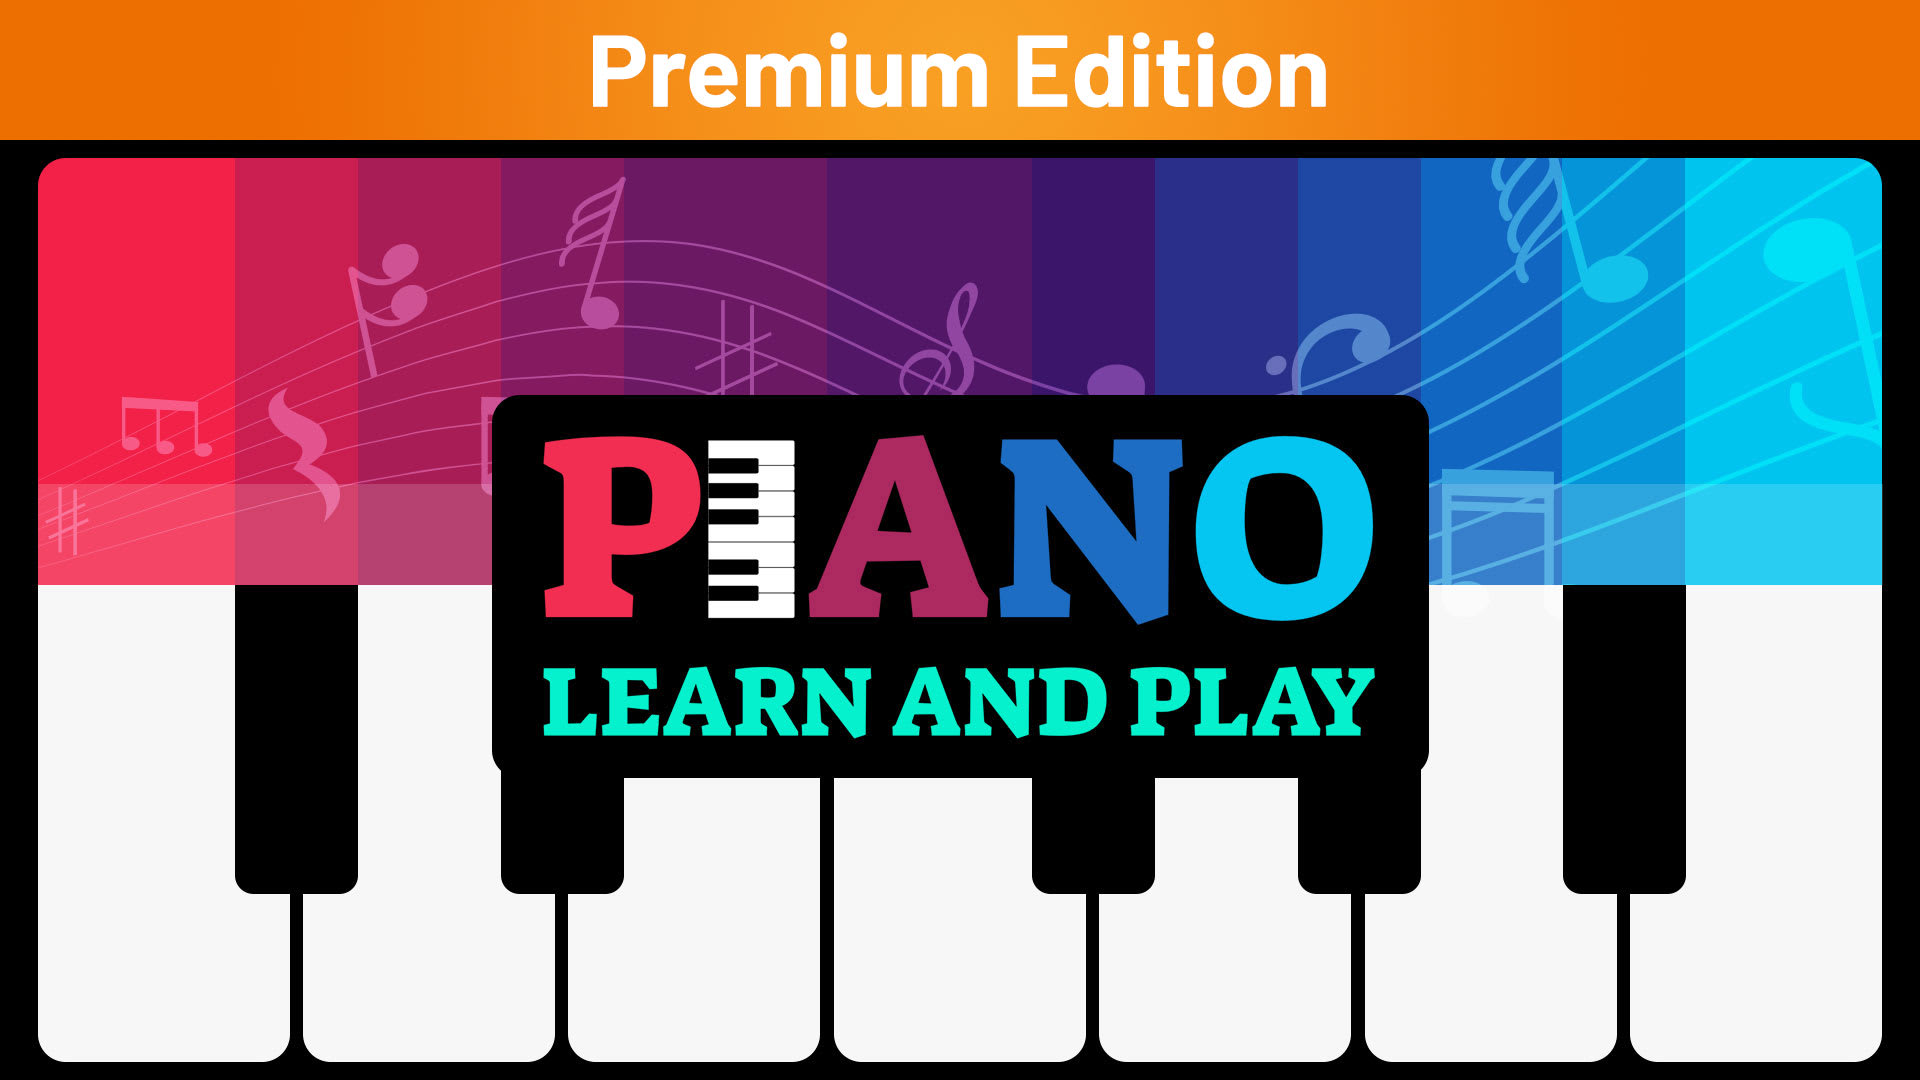 Piano: Learn and Play Premium Edition